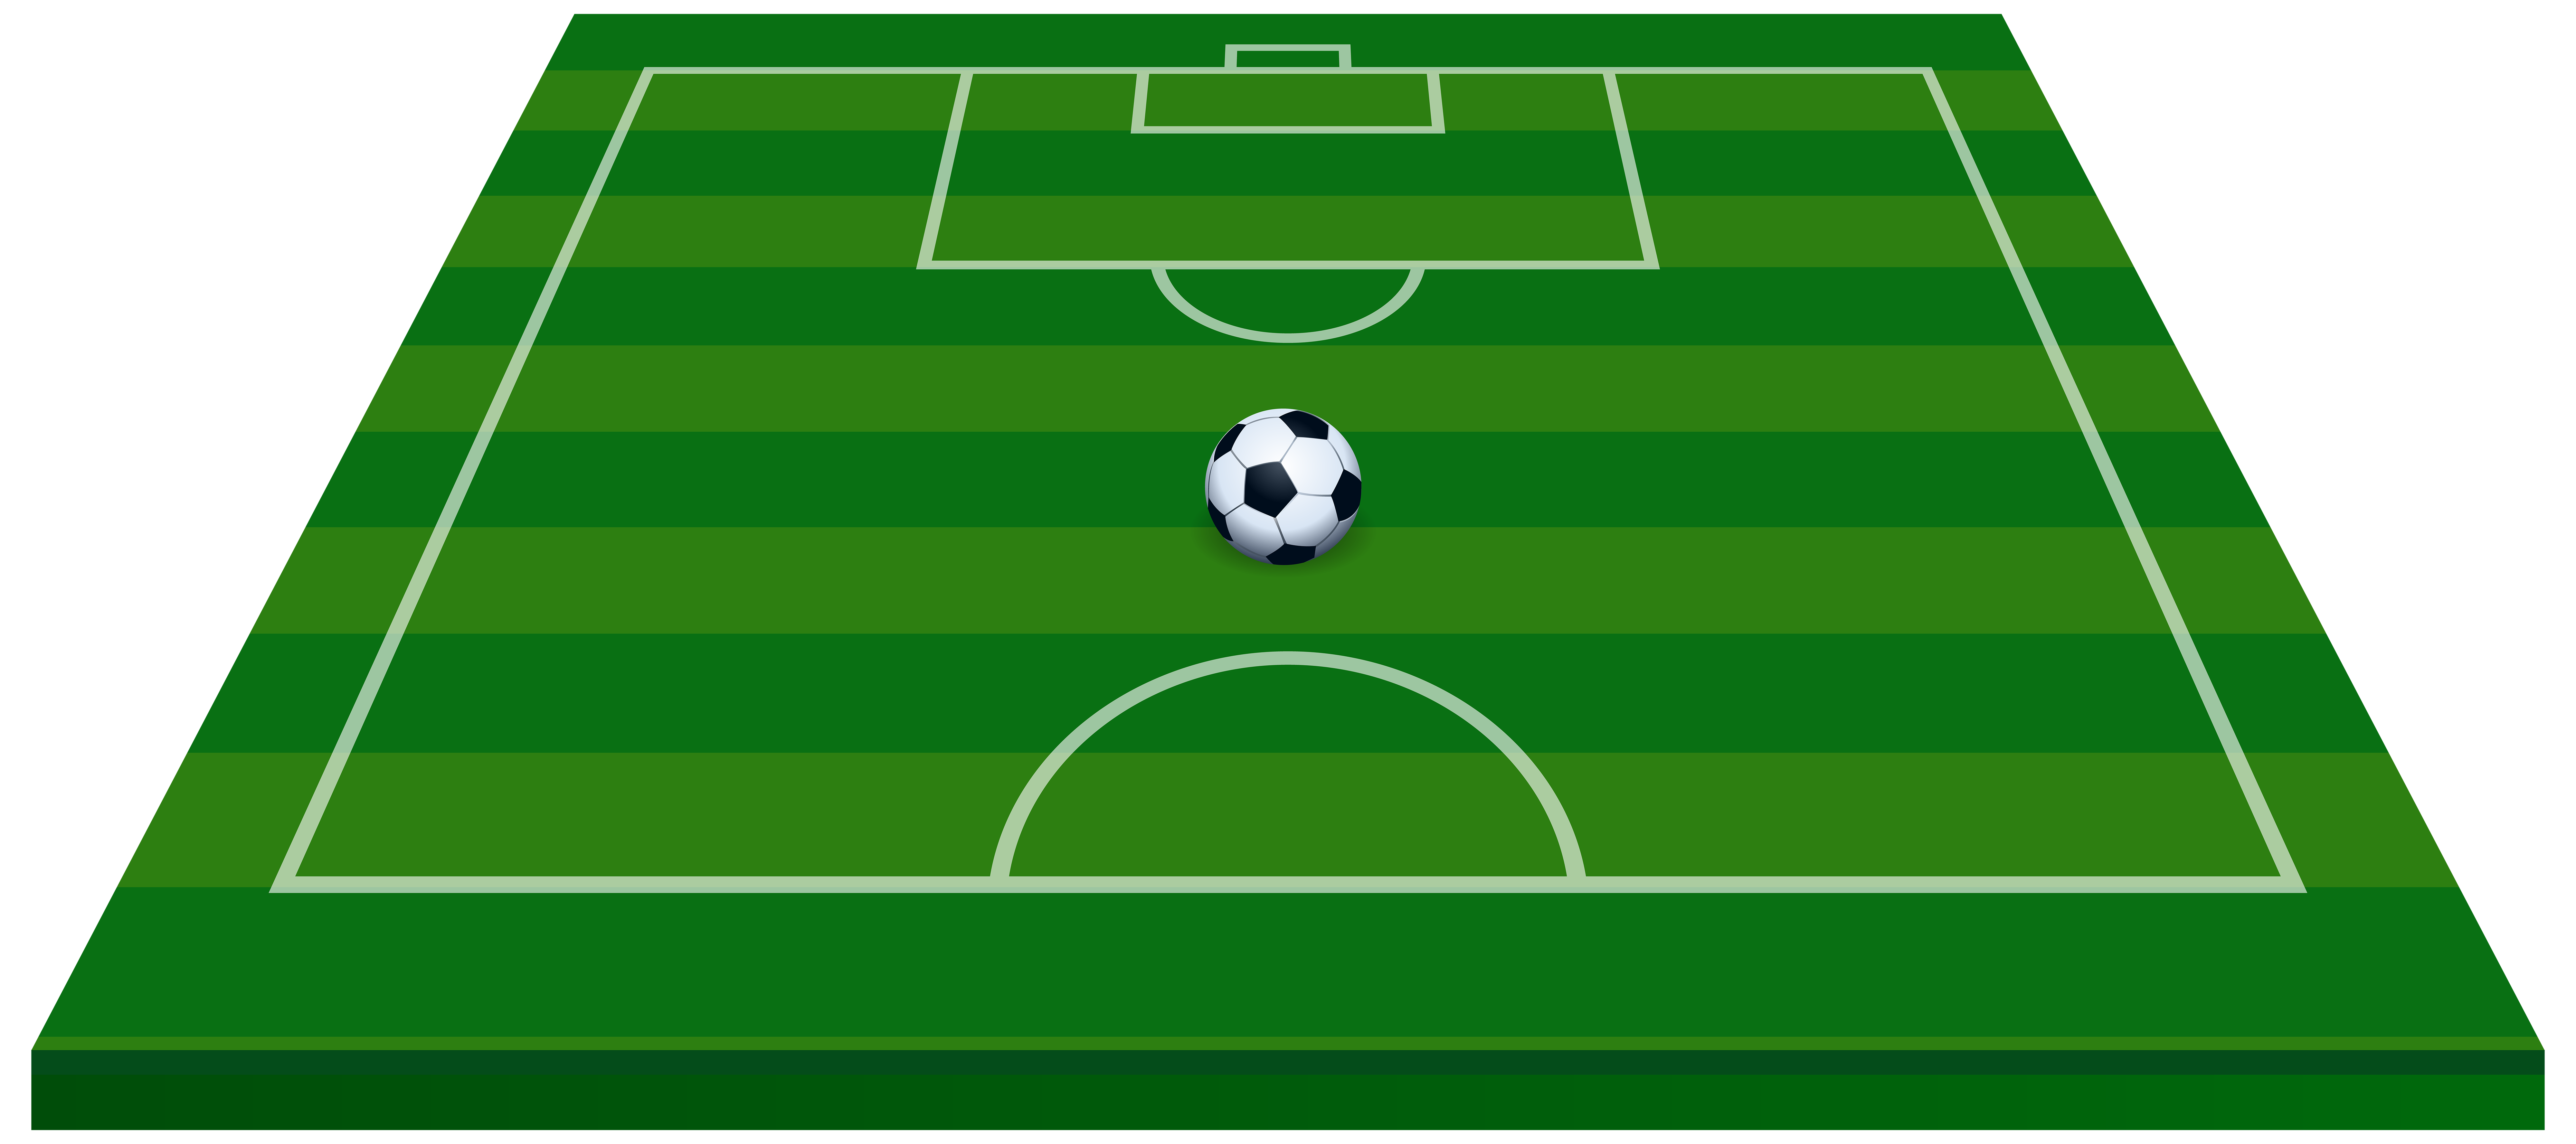 Clip Arts Related To : Football pitch. view all isoccer-field-cliparts). 